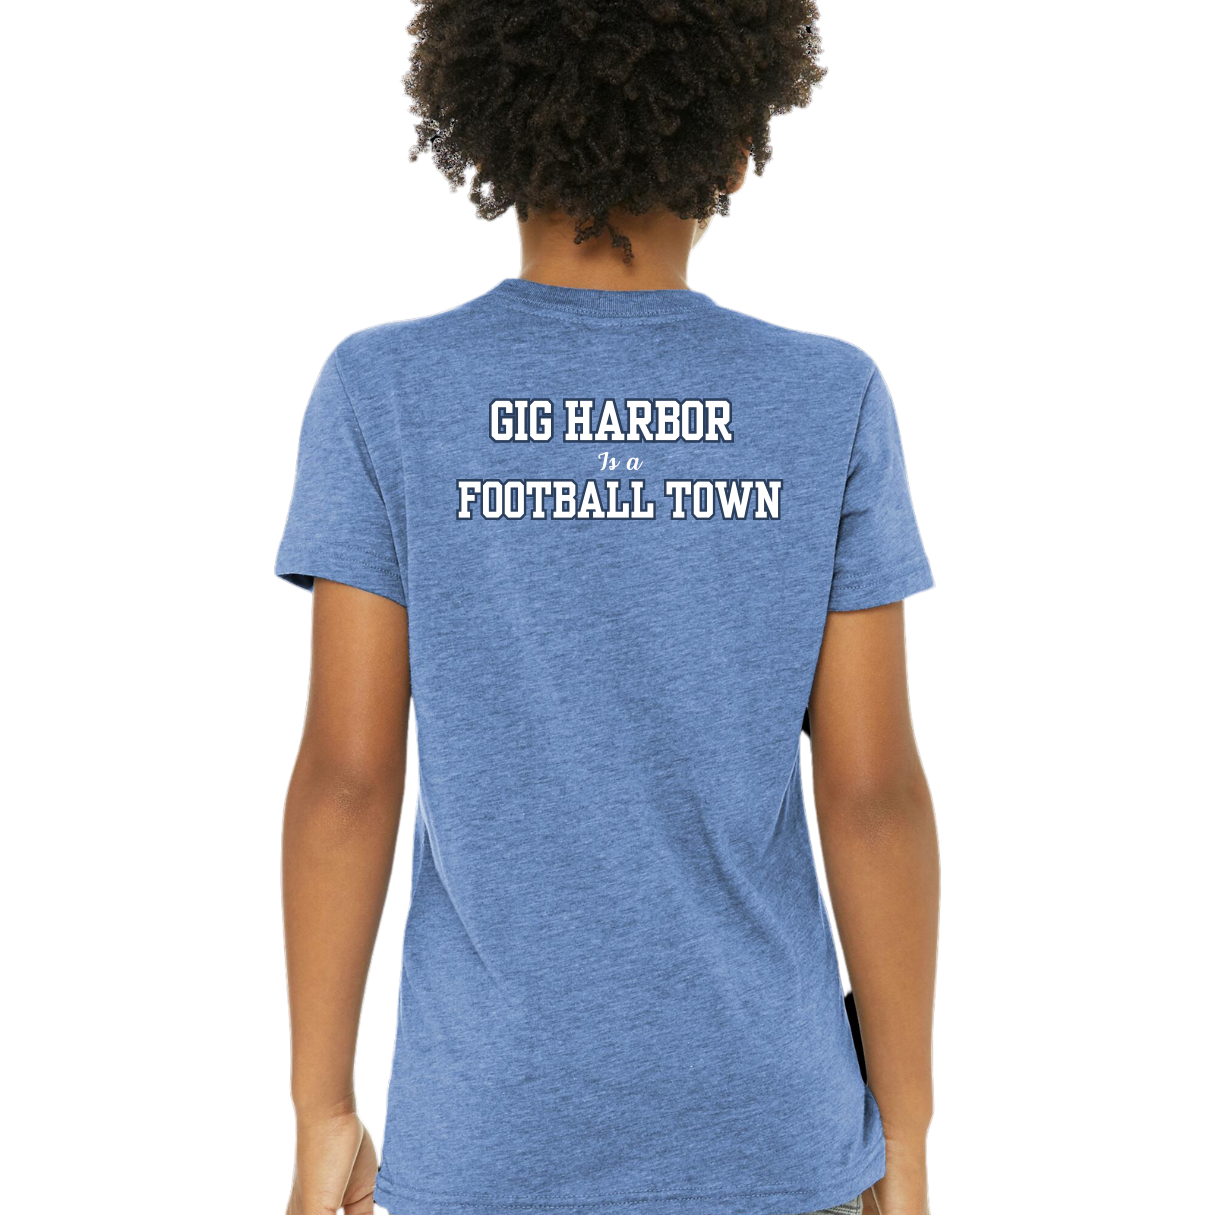 Gig Harbor is a Football Town Tee- Adult and Youth